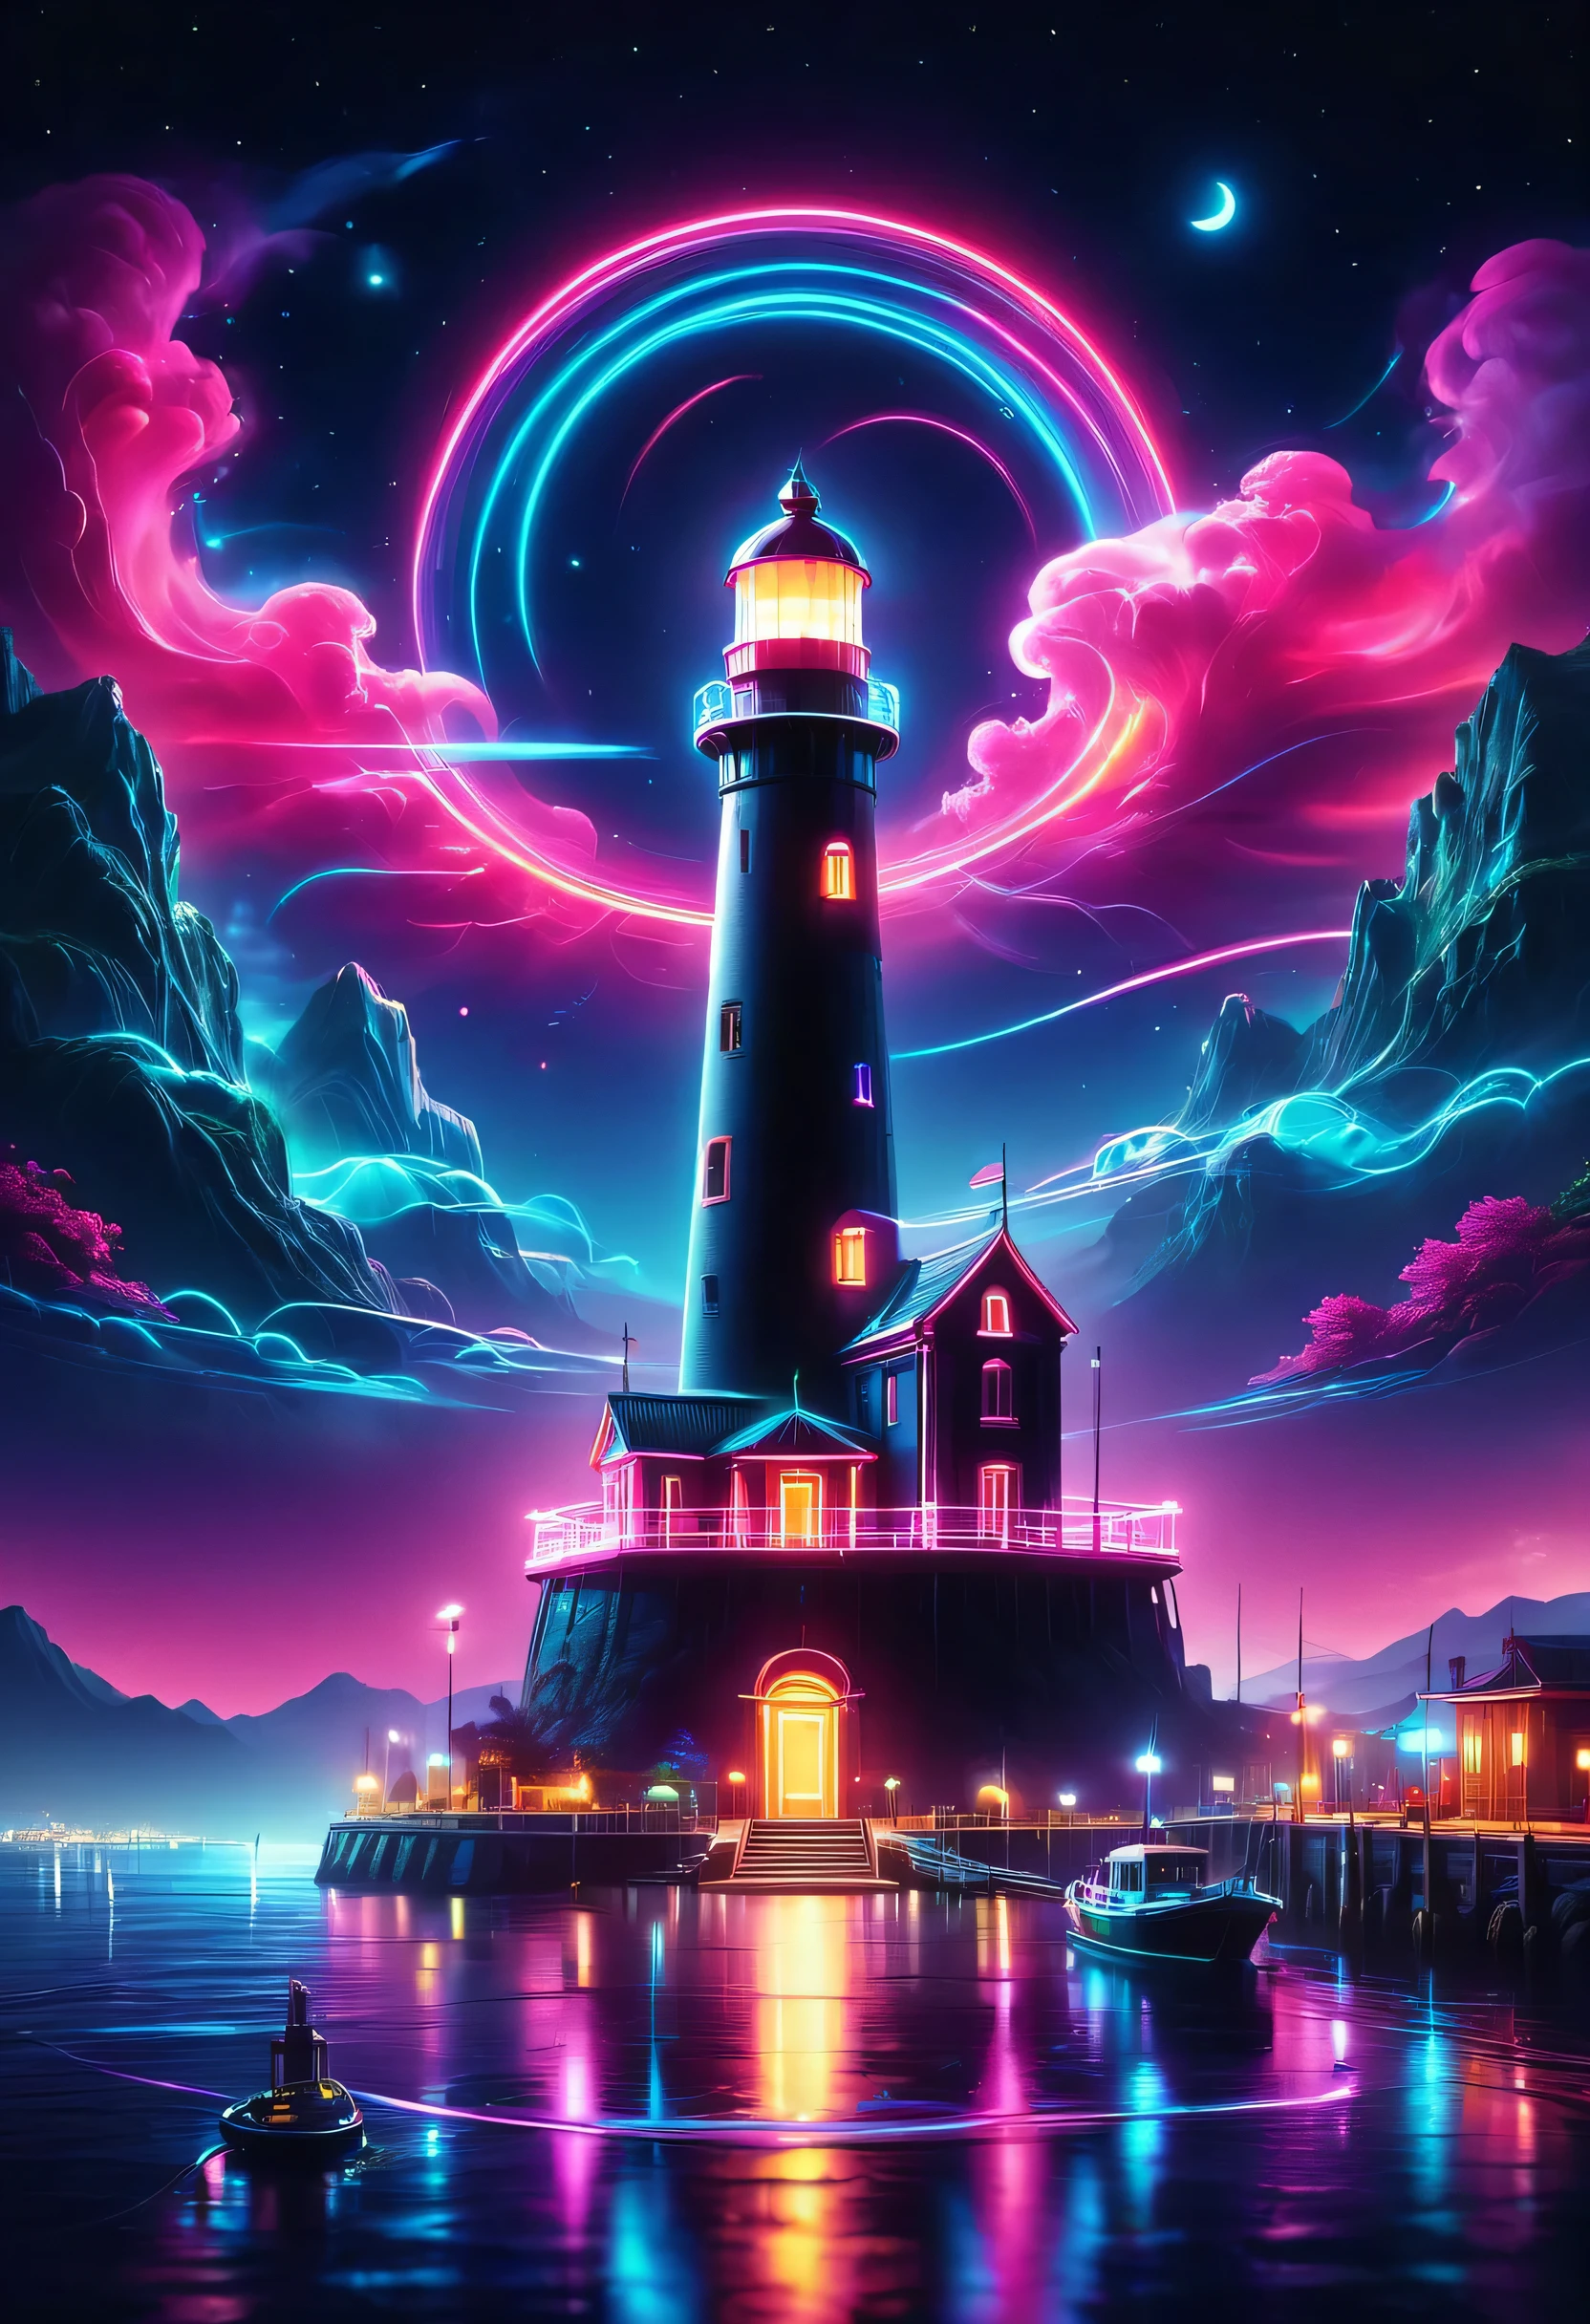 The aesthetics of vaporwave,Landscape painting,Lighthouse colored in neon colors,port town,marina,boat,moon,star,cloud,aurora,beautiful,rich colors,flash,と明るいflash,Cast colorful spells,Draw in neon colors on a dark background,古き良きport townの風景と現代アートの融合,Pop Illustration,poster,perfect composition,Design that expresses Italy,tangled,magic element,wonderful,masterpiece,4k,works of art,Bright colors,black,pink,Light blue,purple